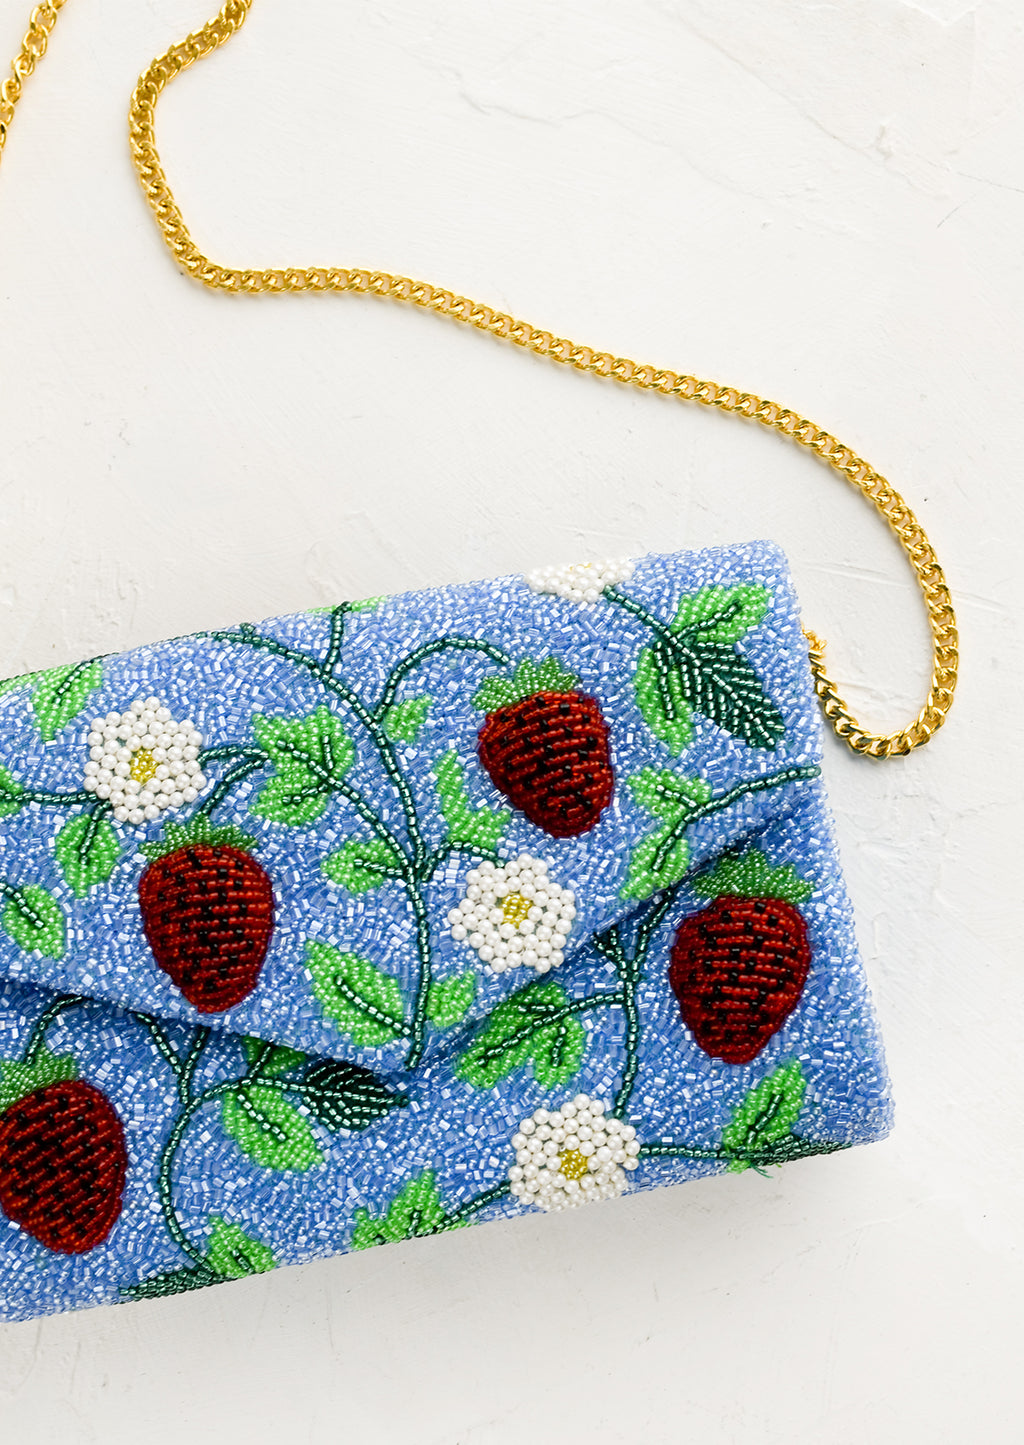 2: A blue beaded clutch with red strawberry pattern and gold chain strap.